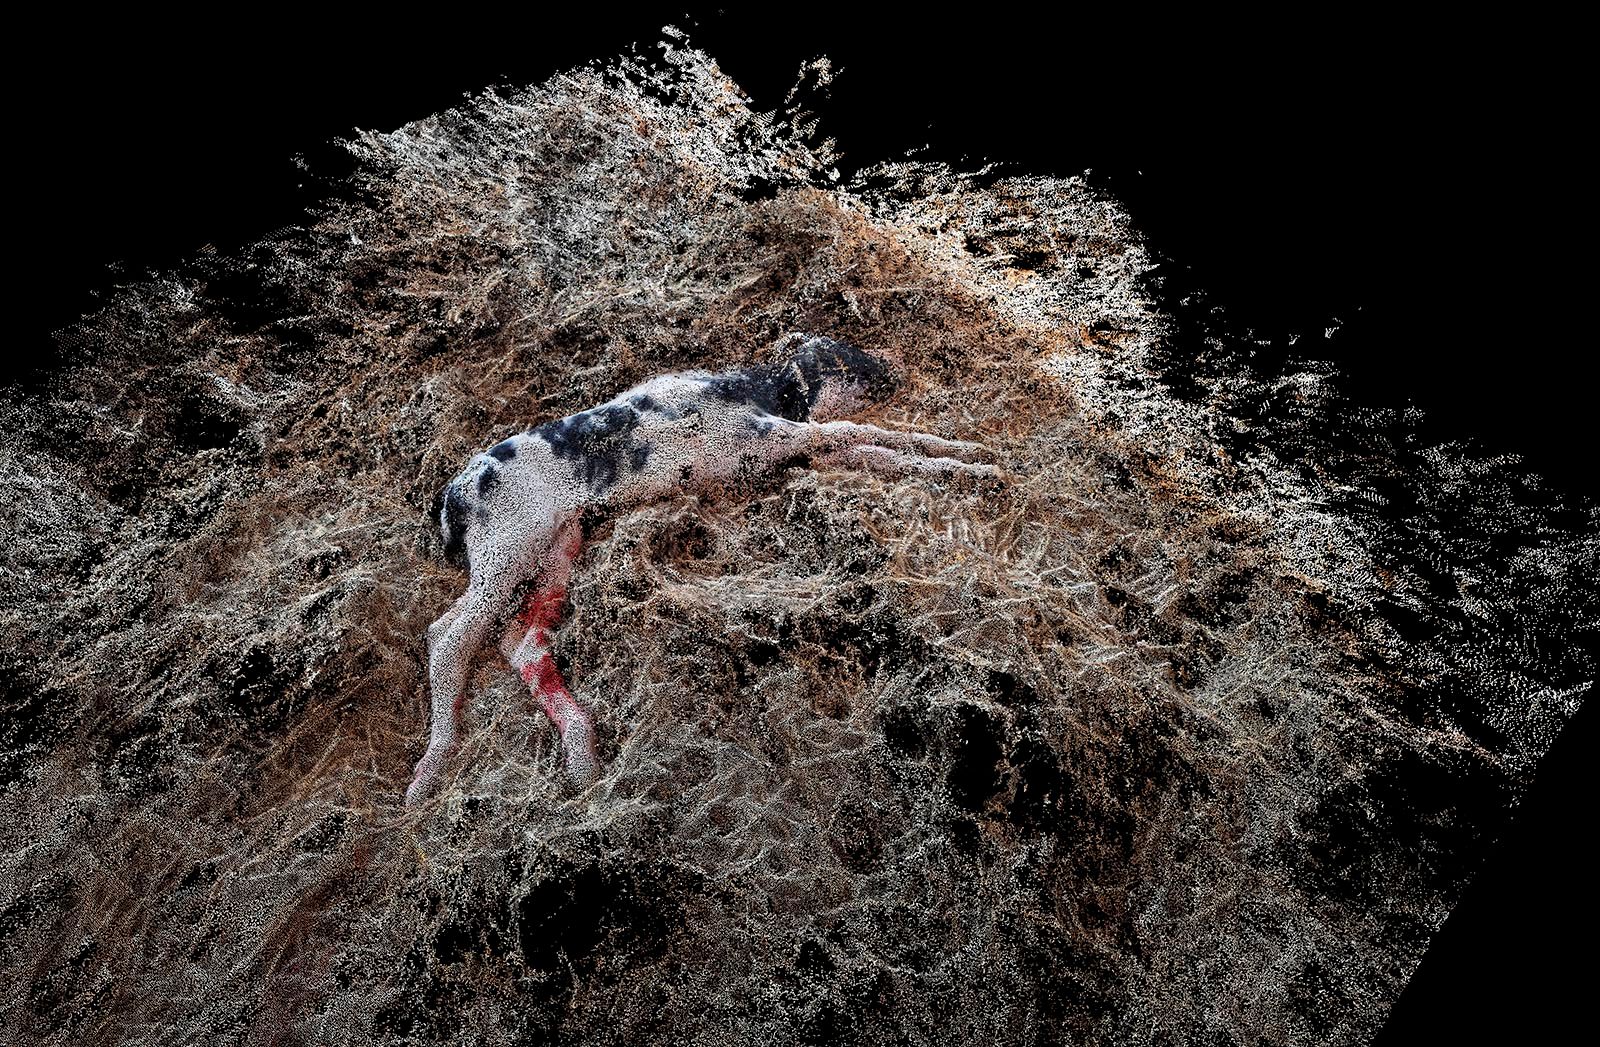 © Daniel Szalai - Image from the Unleash Your Herd's Potential photography project